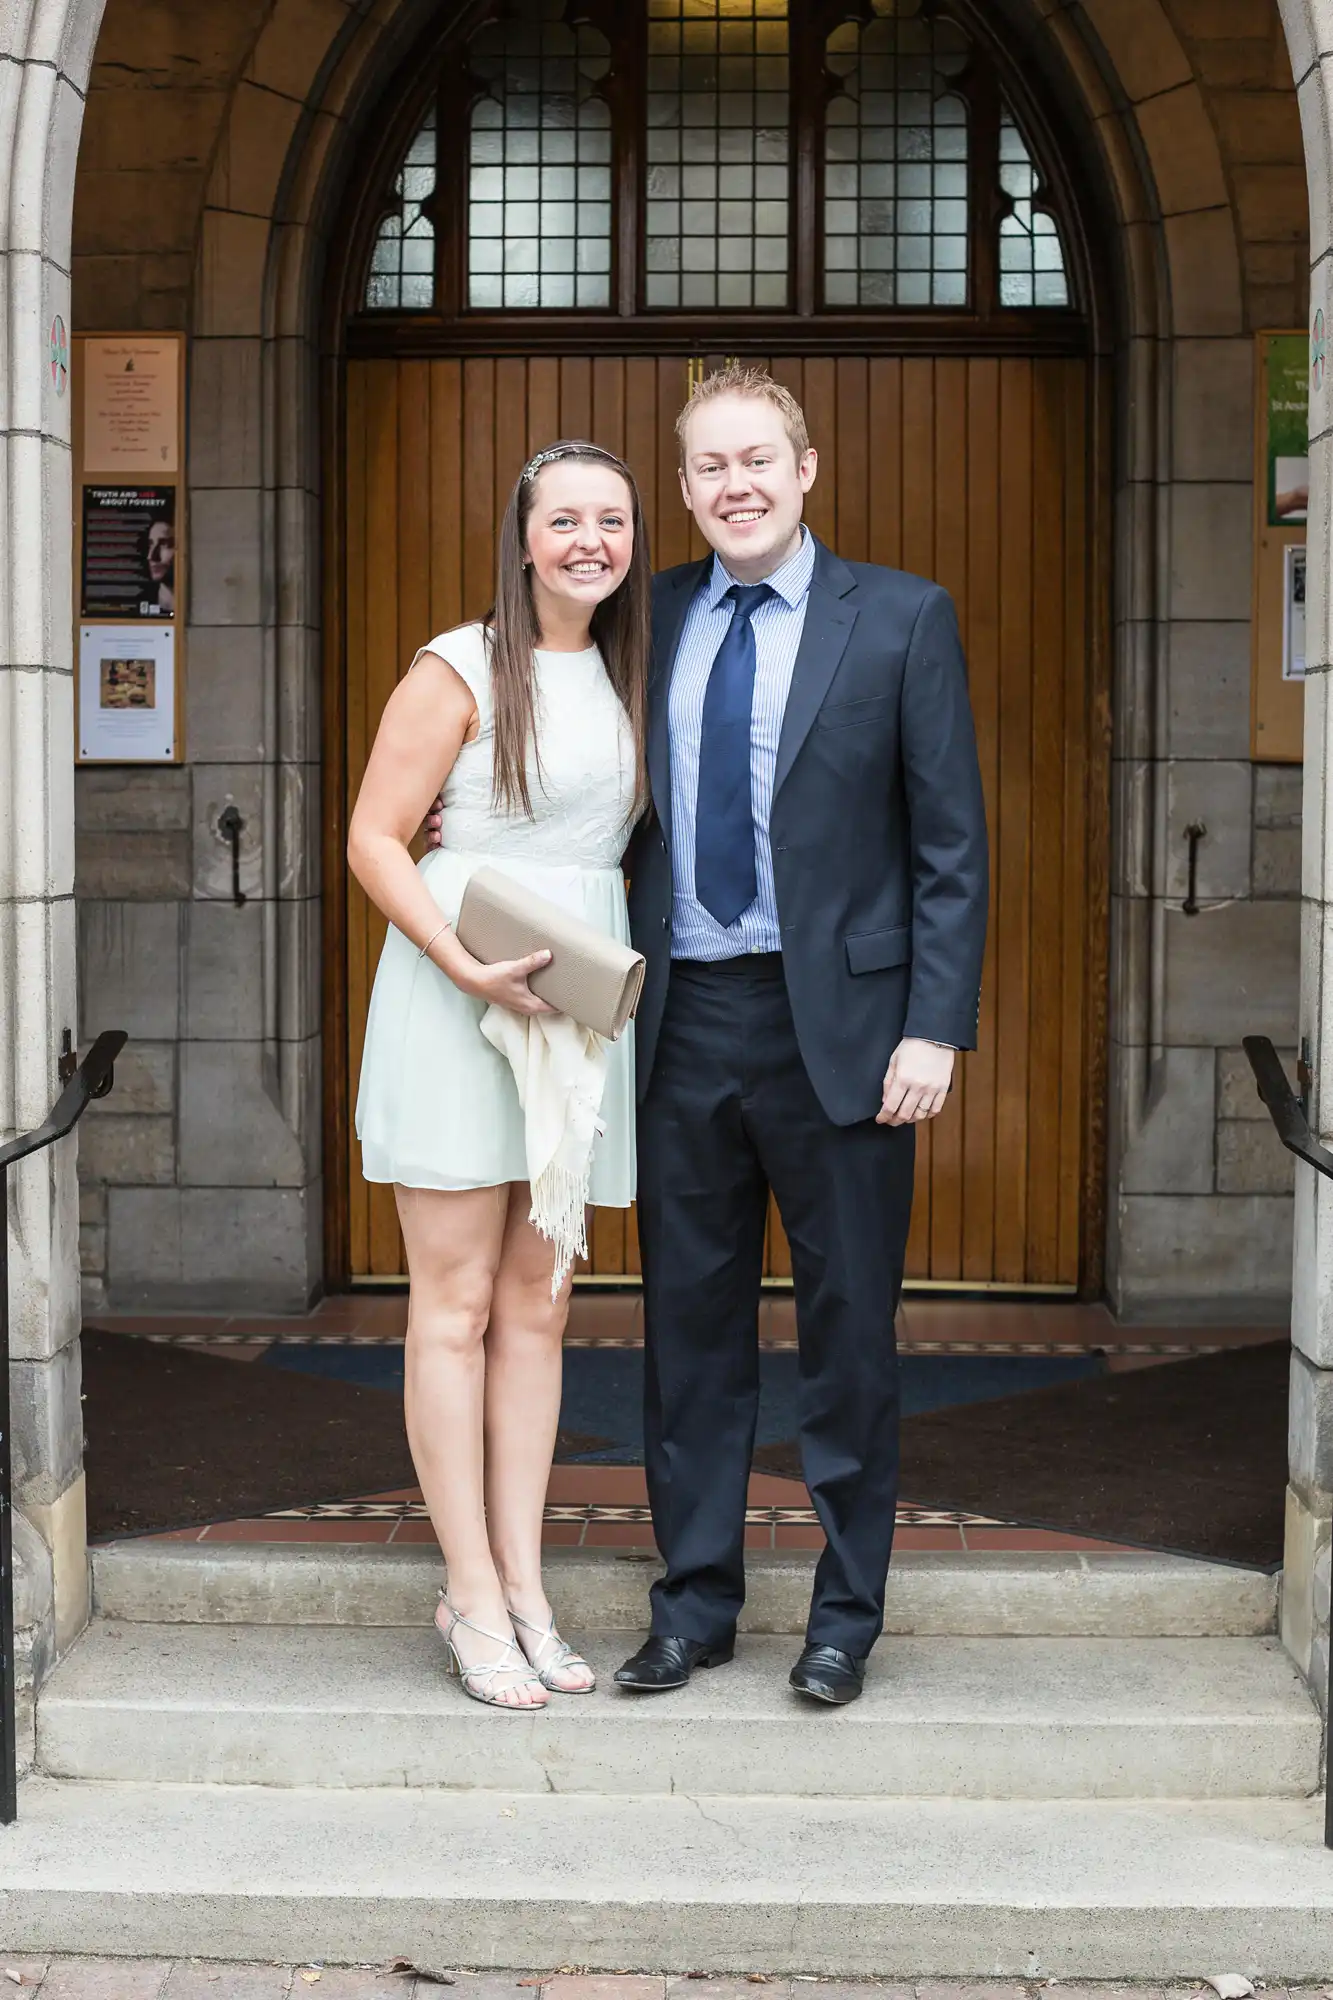 A smiling couple standing in front of a church entrance, the woman holding a book and the man in a suit.